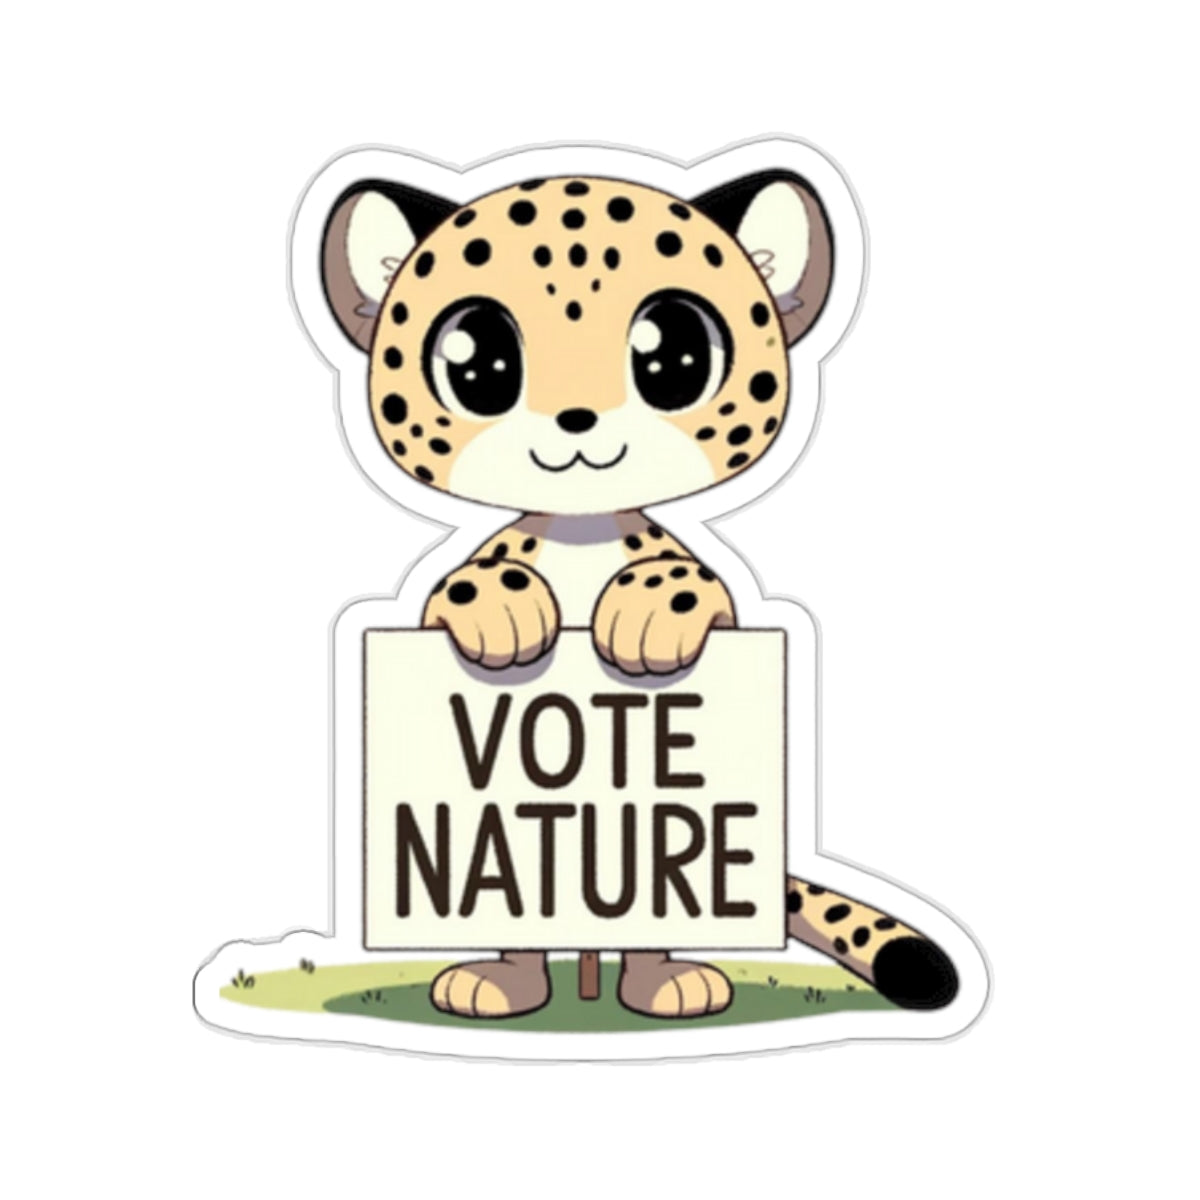 Inspirational Cute Cheetah Statement vinyl Sticker: Vote Nature! for laptop, kindle, phone, ipad, instrument case, notebook, mood board